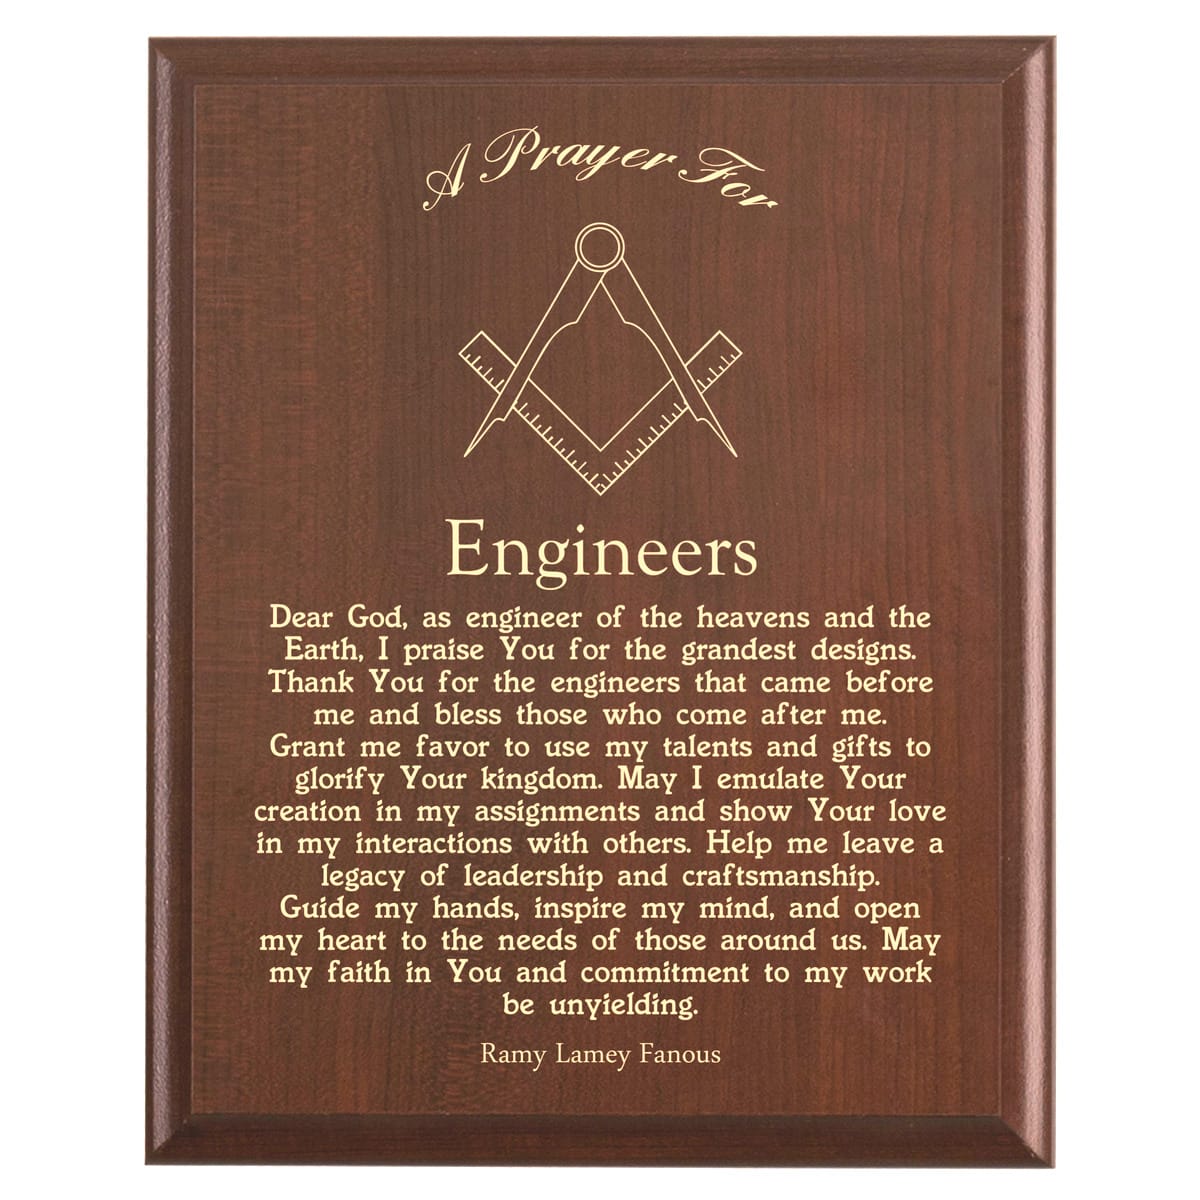 Plaque photo: Engineer Prayer Plaque design with free personalization. Wood style finish with customized text.